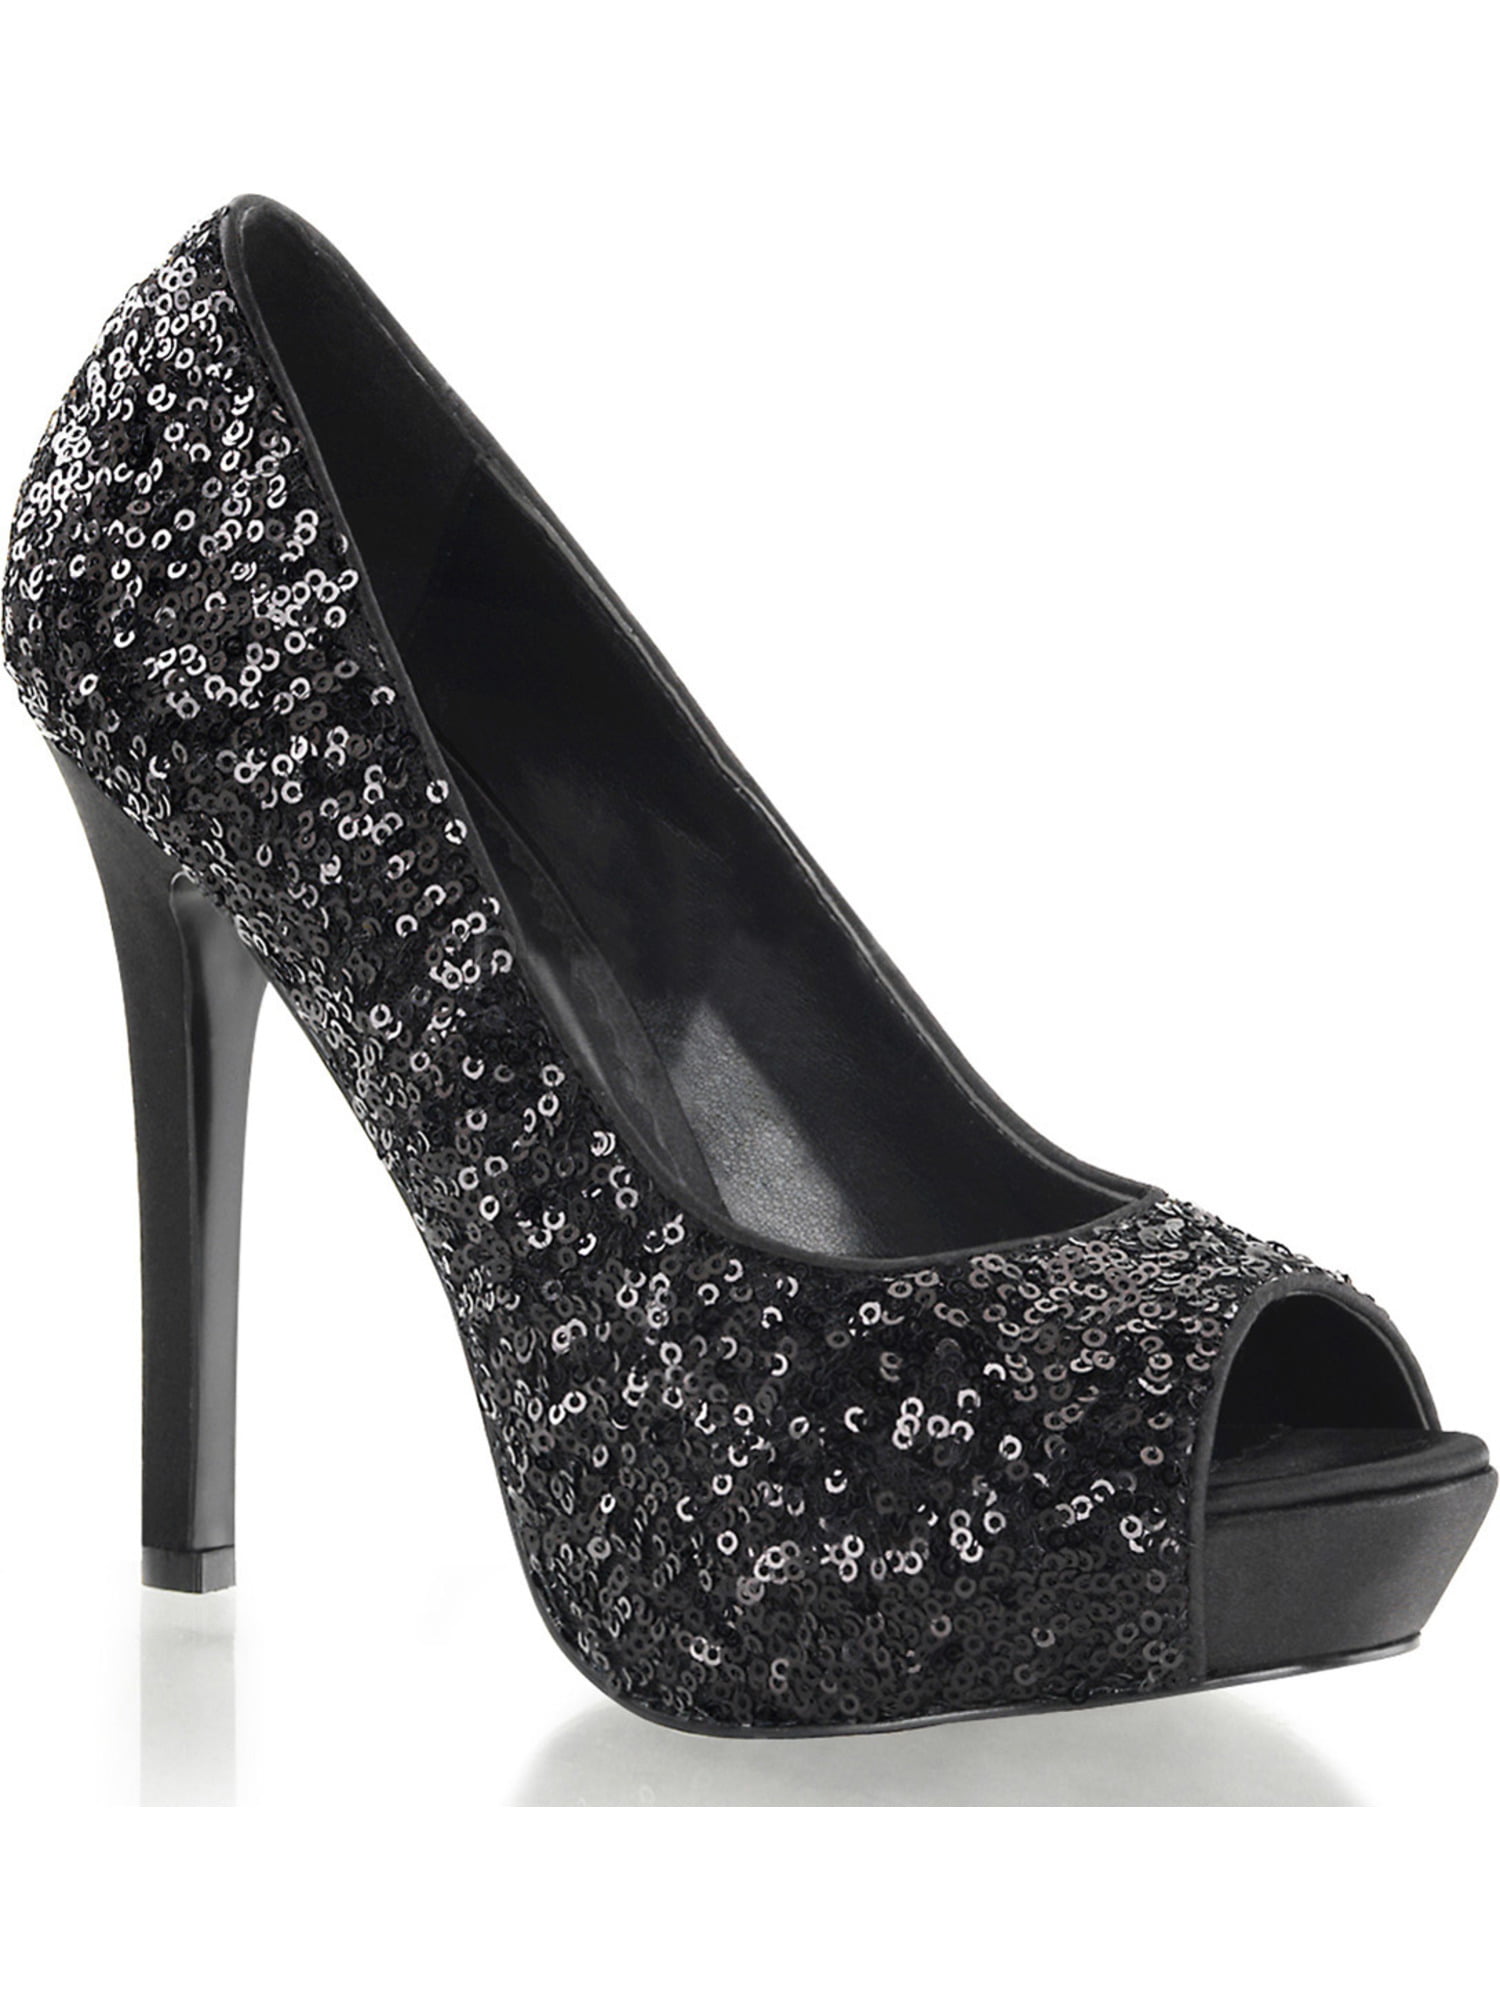 Fabulicious - Womens Peep Toe Black Sequin Pumps Dress Shoes with 4.75 ...